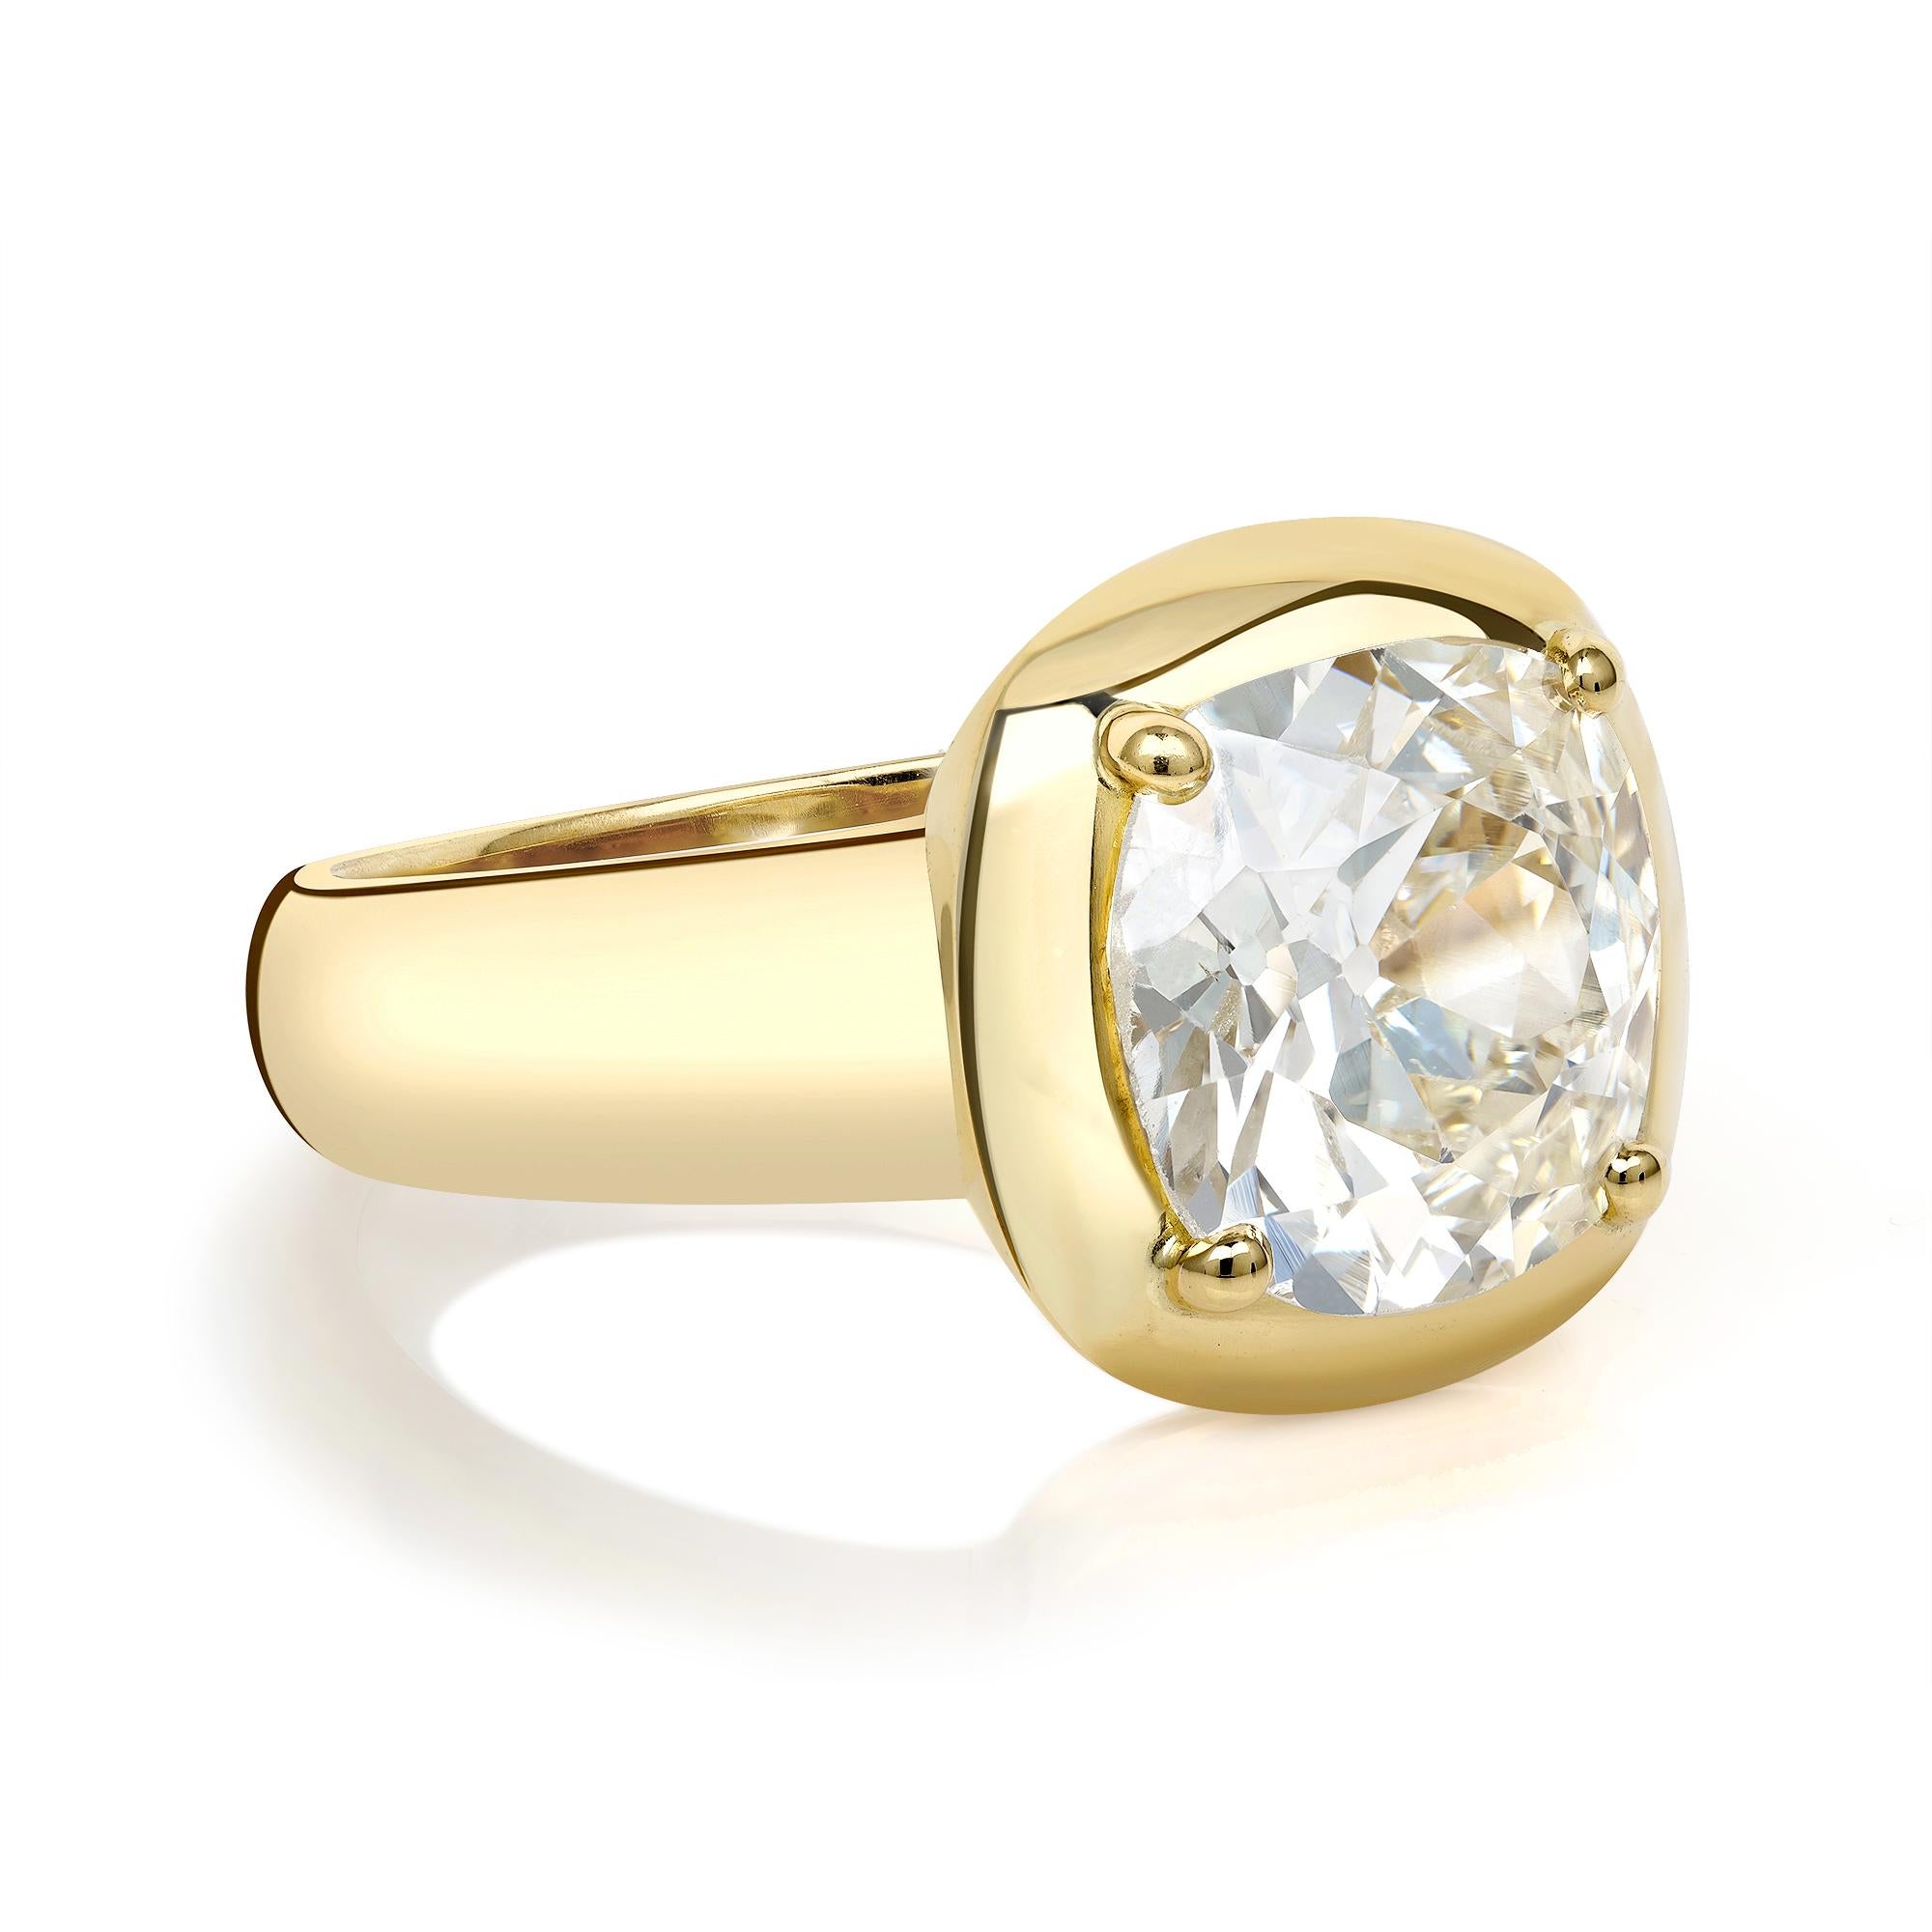 3.07ct M/VS2 GIA certified Old Mine Cut diamond prong set in a handcrafted 18K yellow gold mounting,